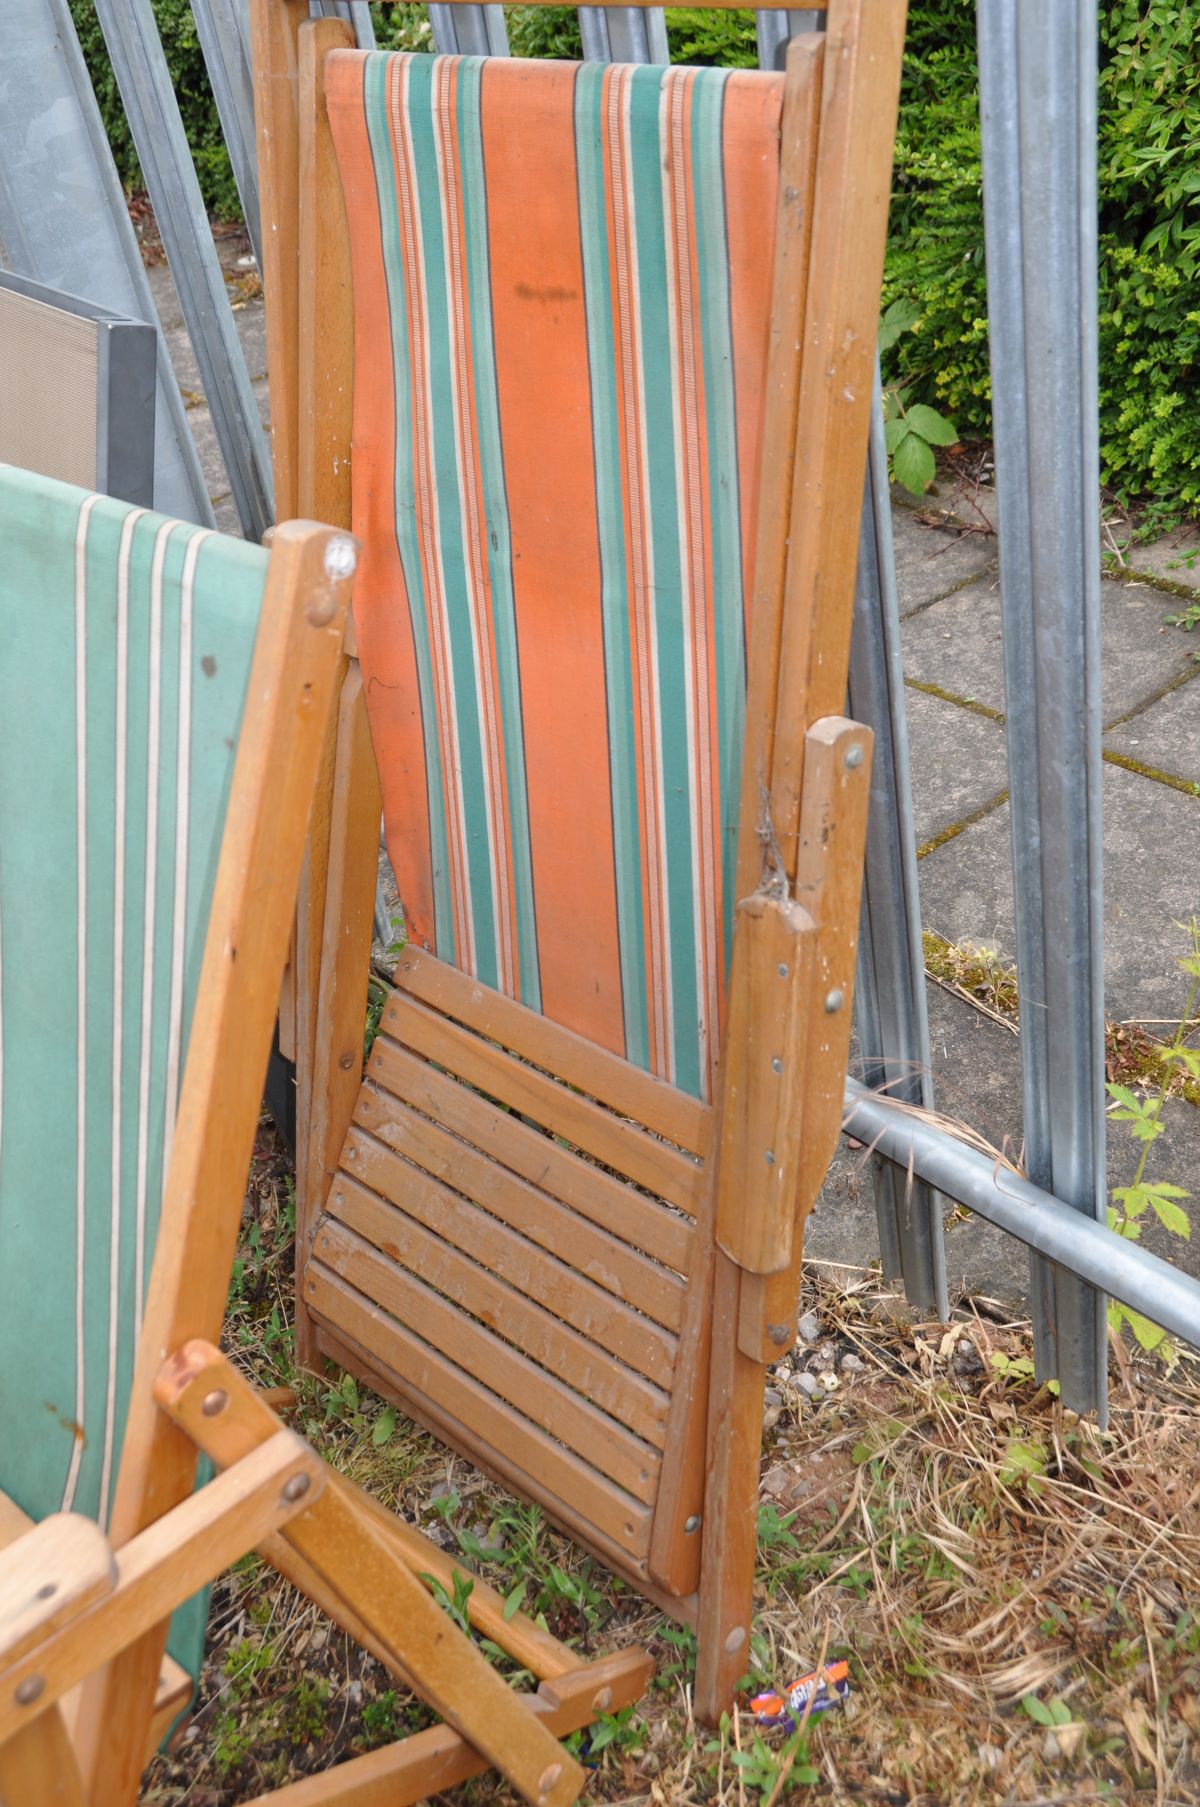 TWO MID 20TH CENTURY DECK CHAIRS with fabric backs and slatted seats width between arms 49cm (2) - Image 2 of 2